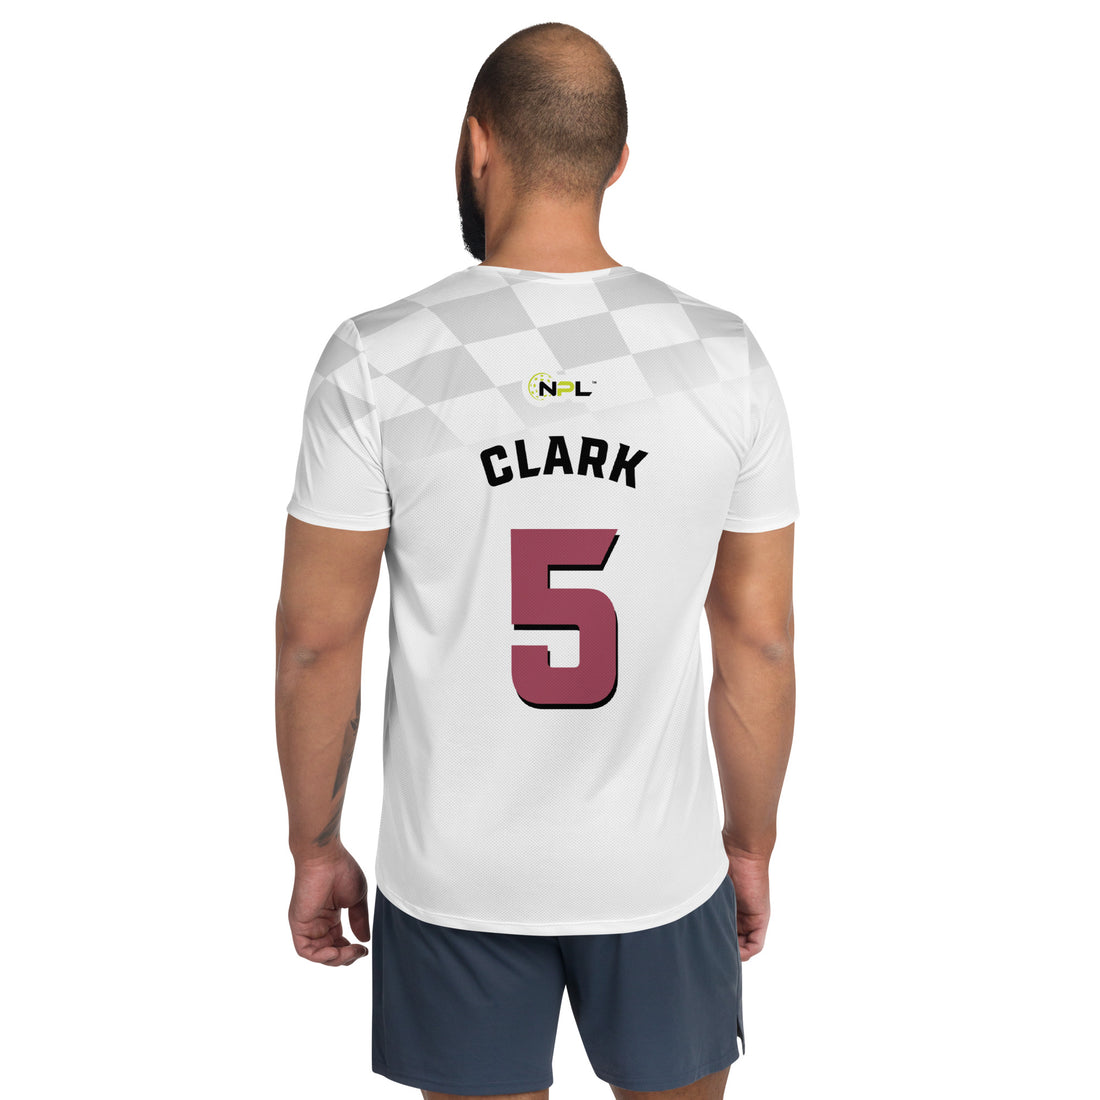 Martin Clark 5 Indy Drivers™ SKYblue 2023 Authentic Jersey - White